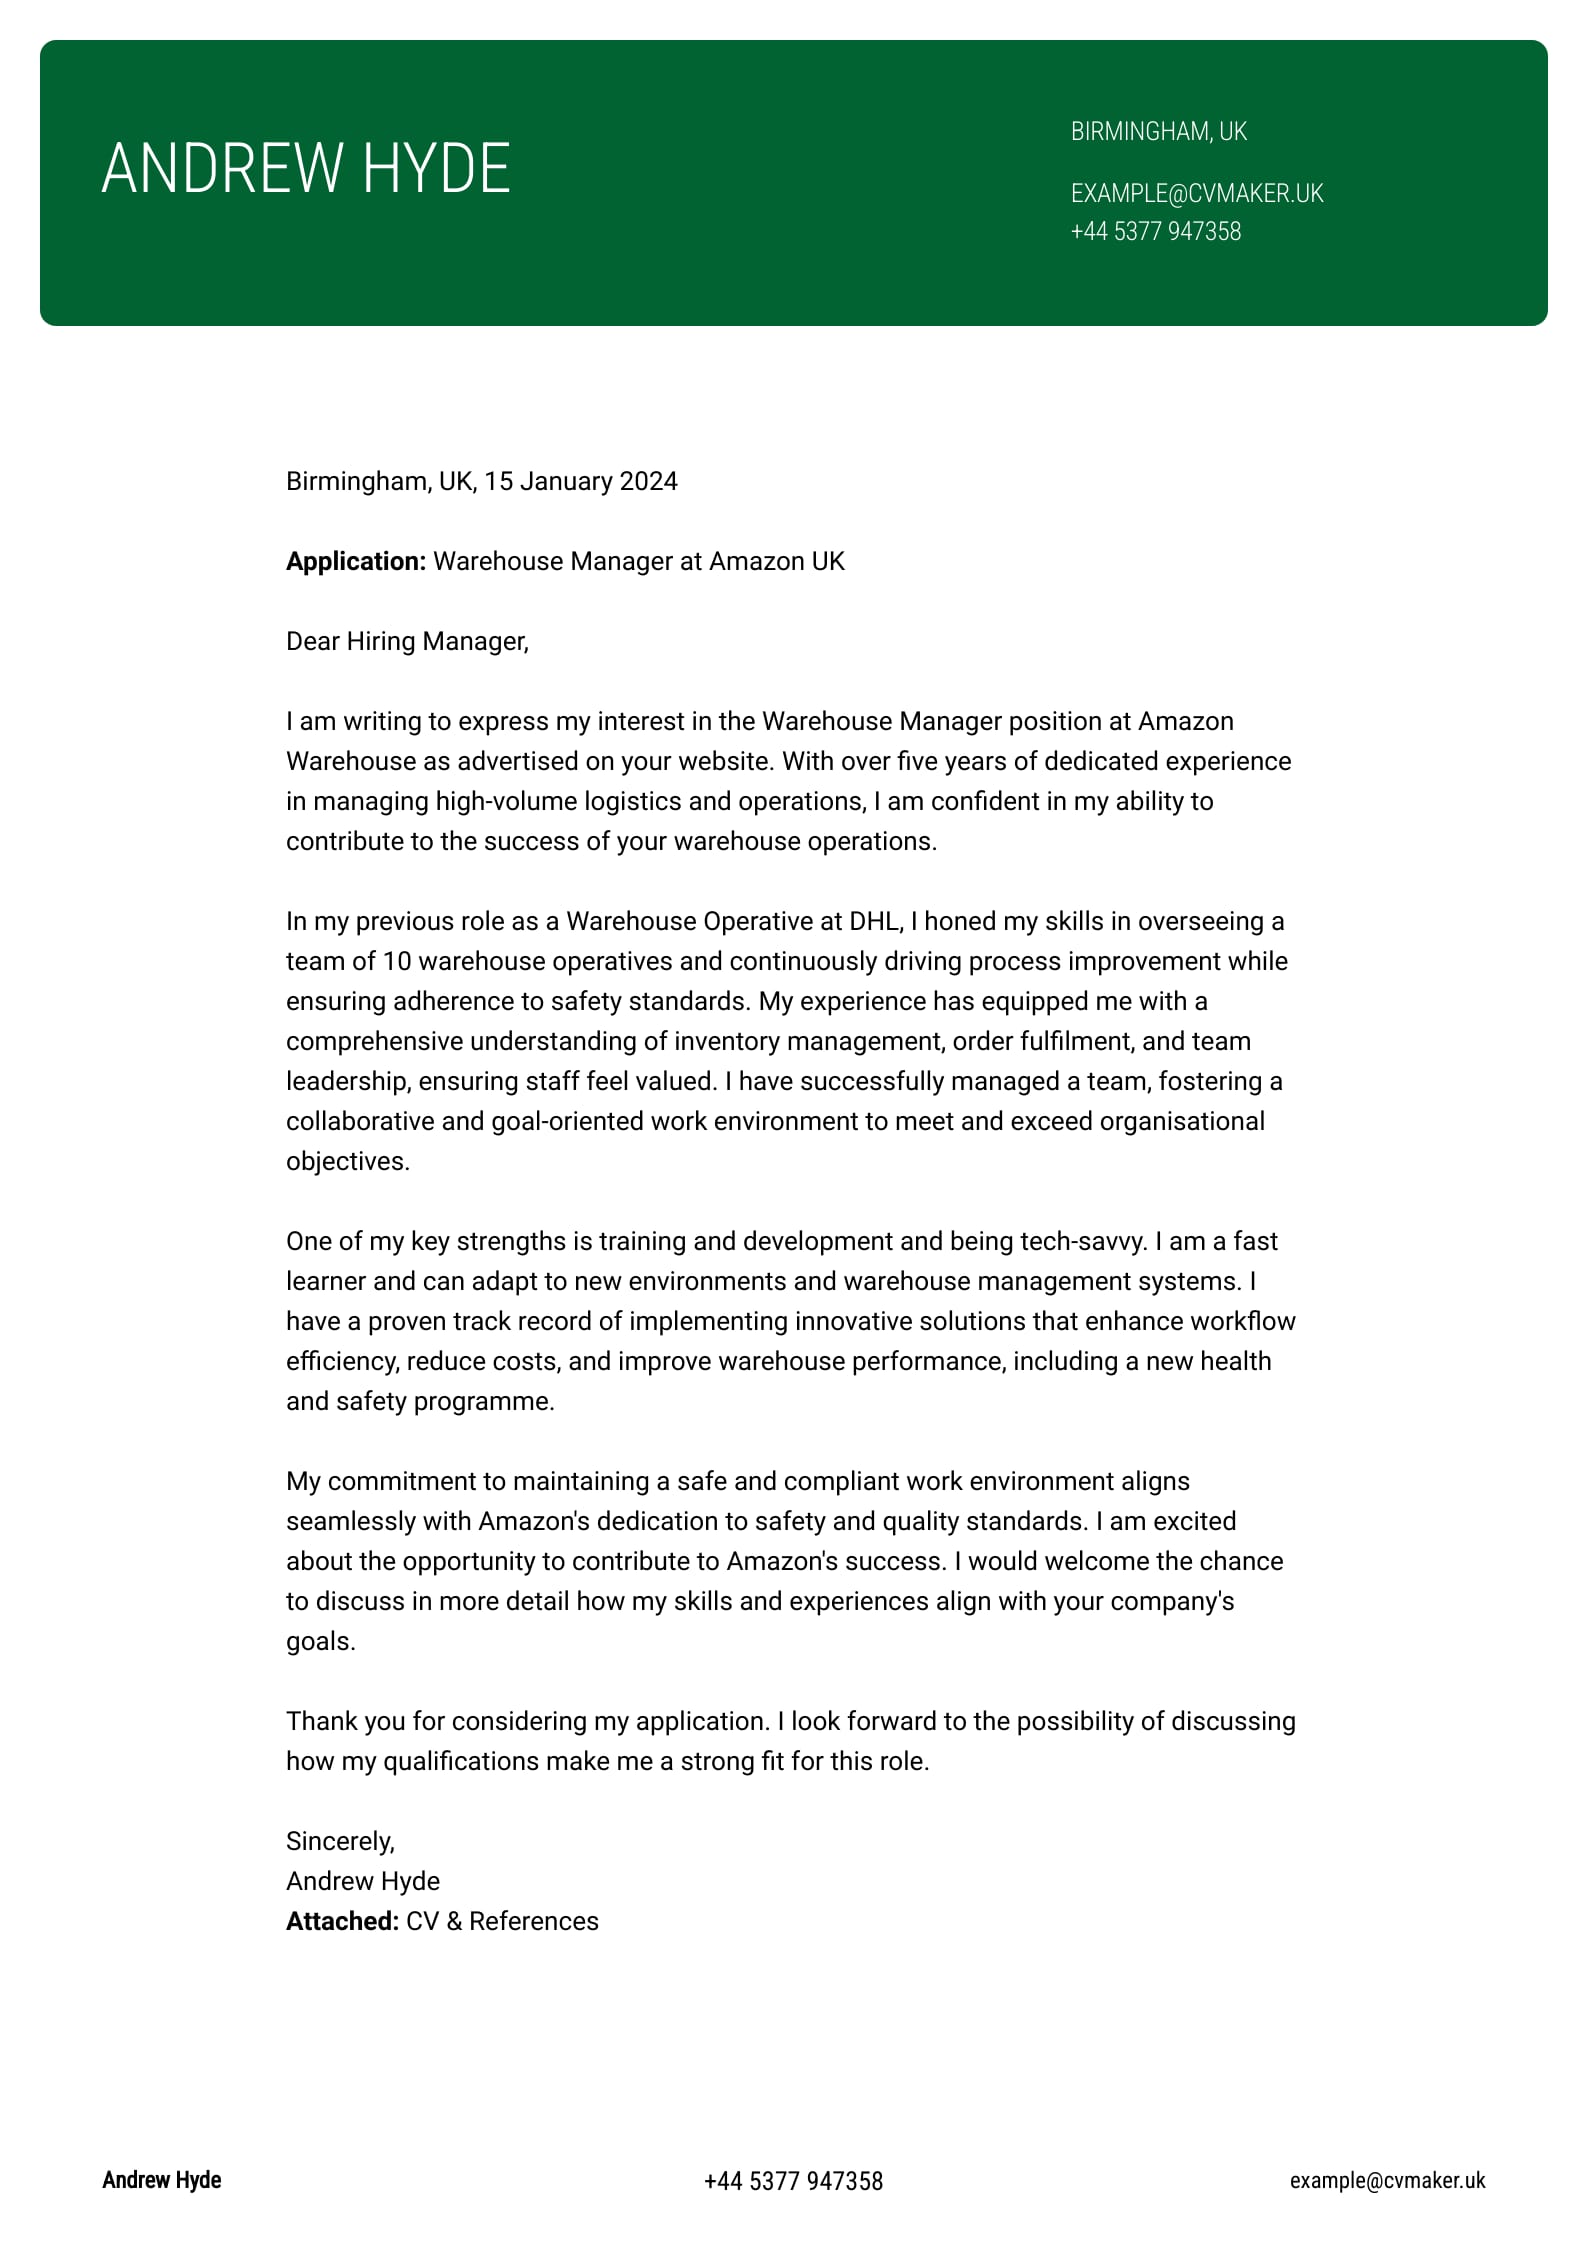 Cover Letter example - Warehouse - Cornell template